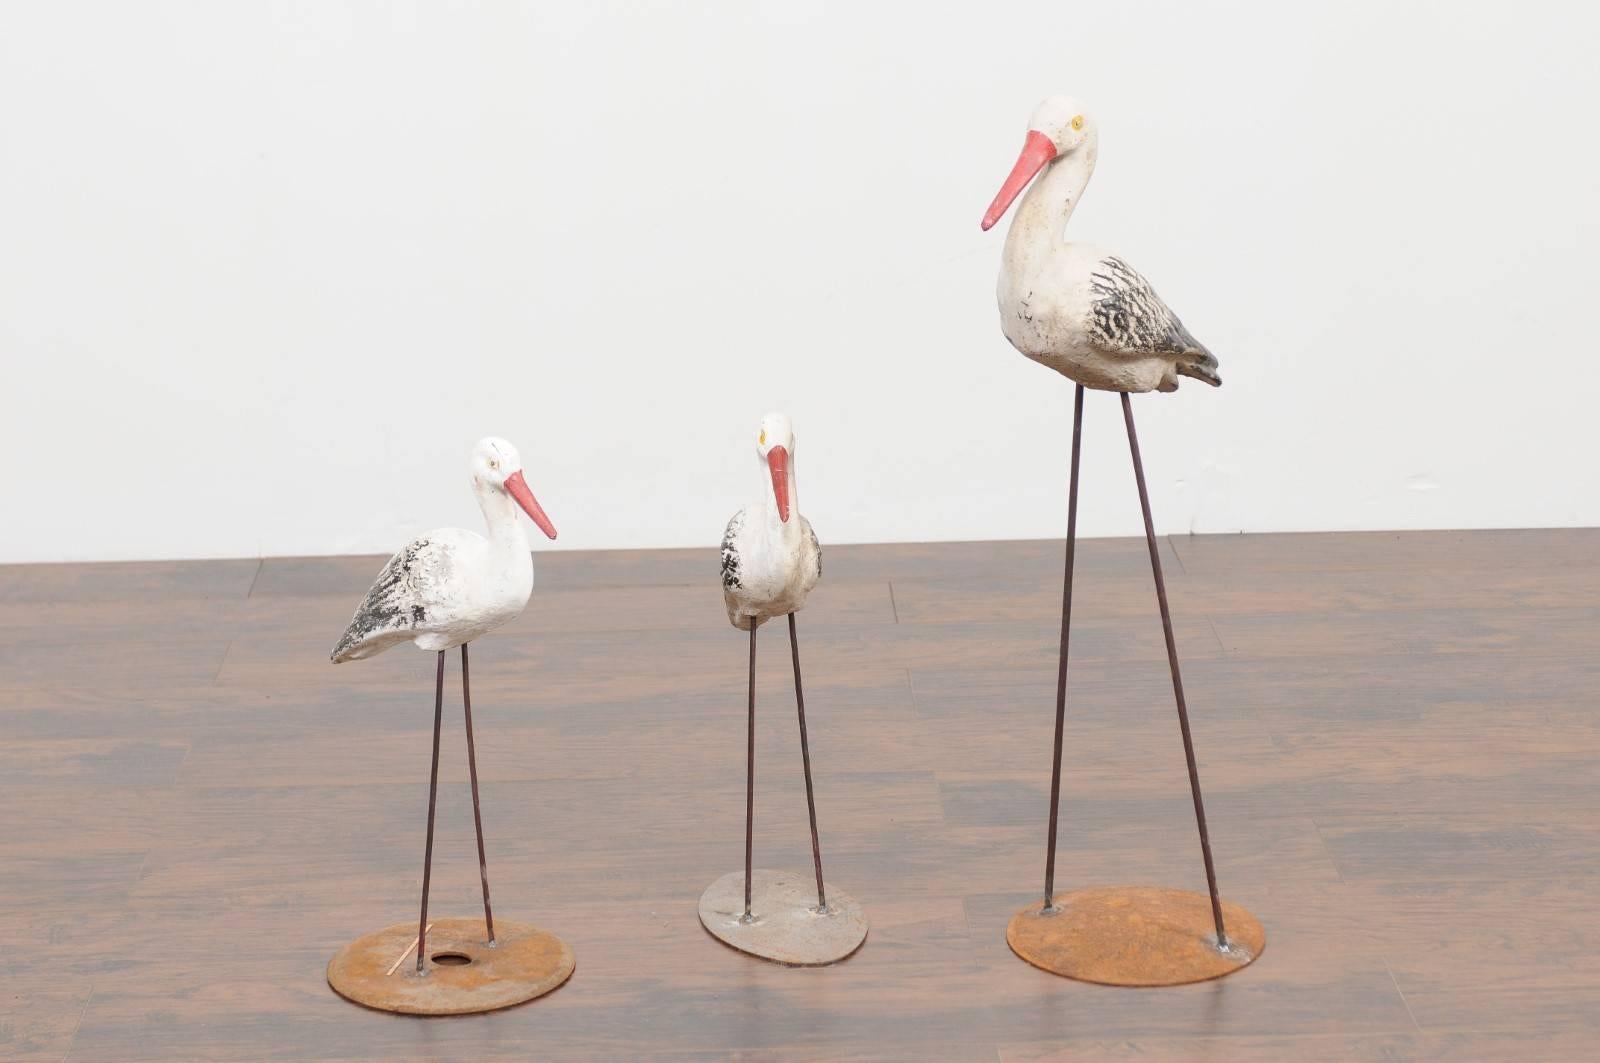 A grouping of three French painted stone storks from Alsace from the early 20th century, mounted on iron bases and sold individually. Discover the charm of Alsace with this captivating grouping of three French painted stone storks, each a symbol of